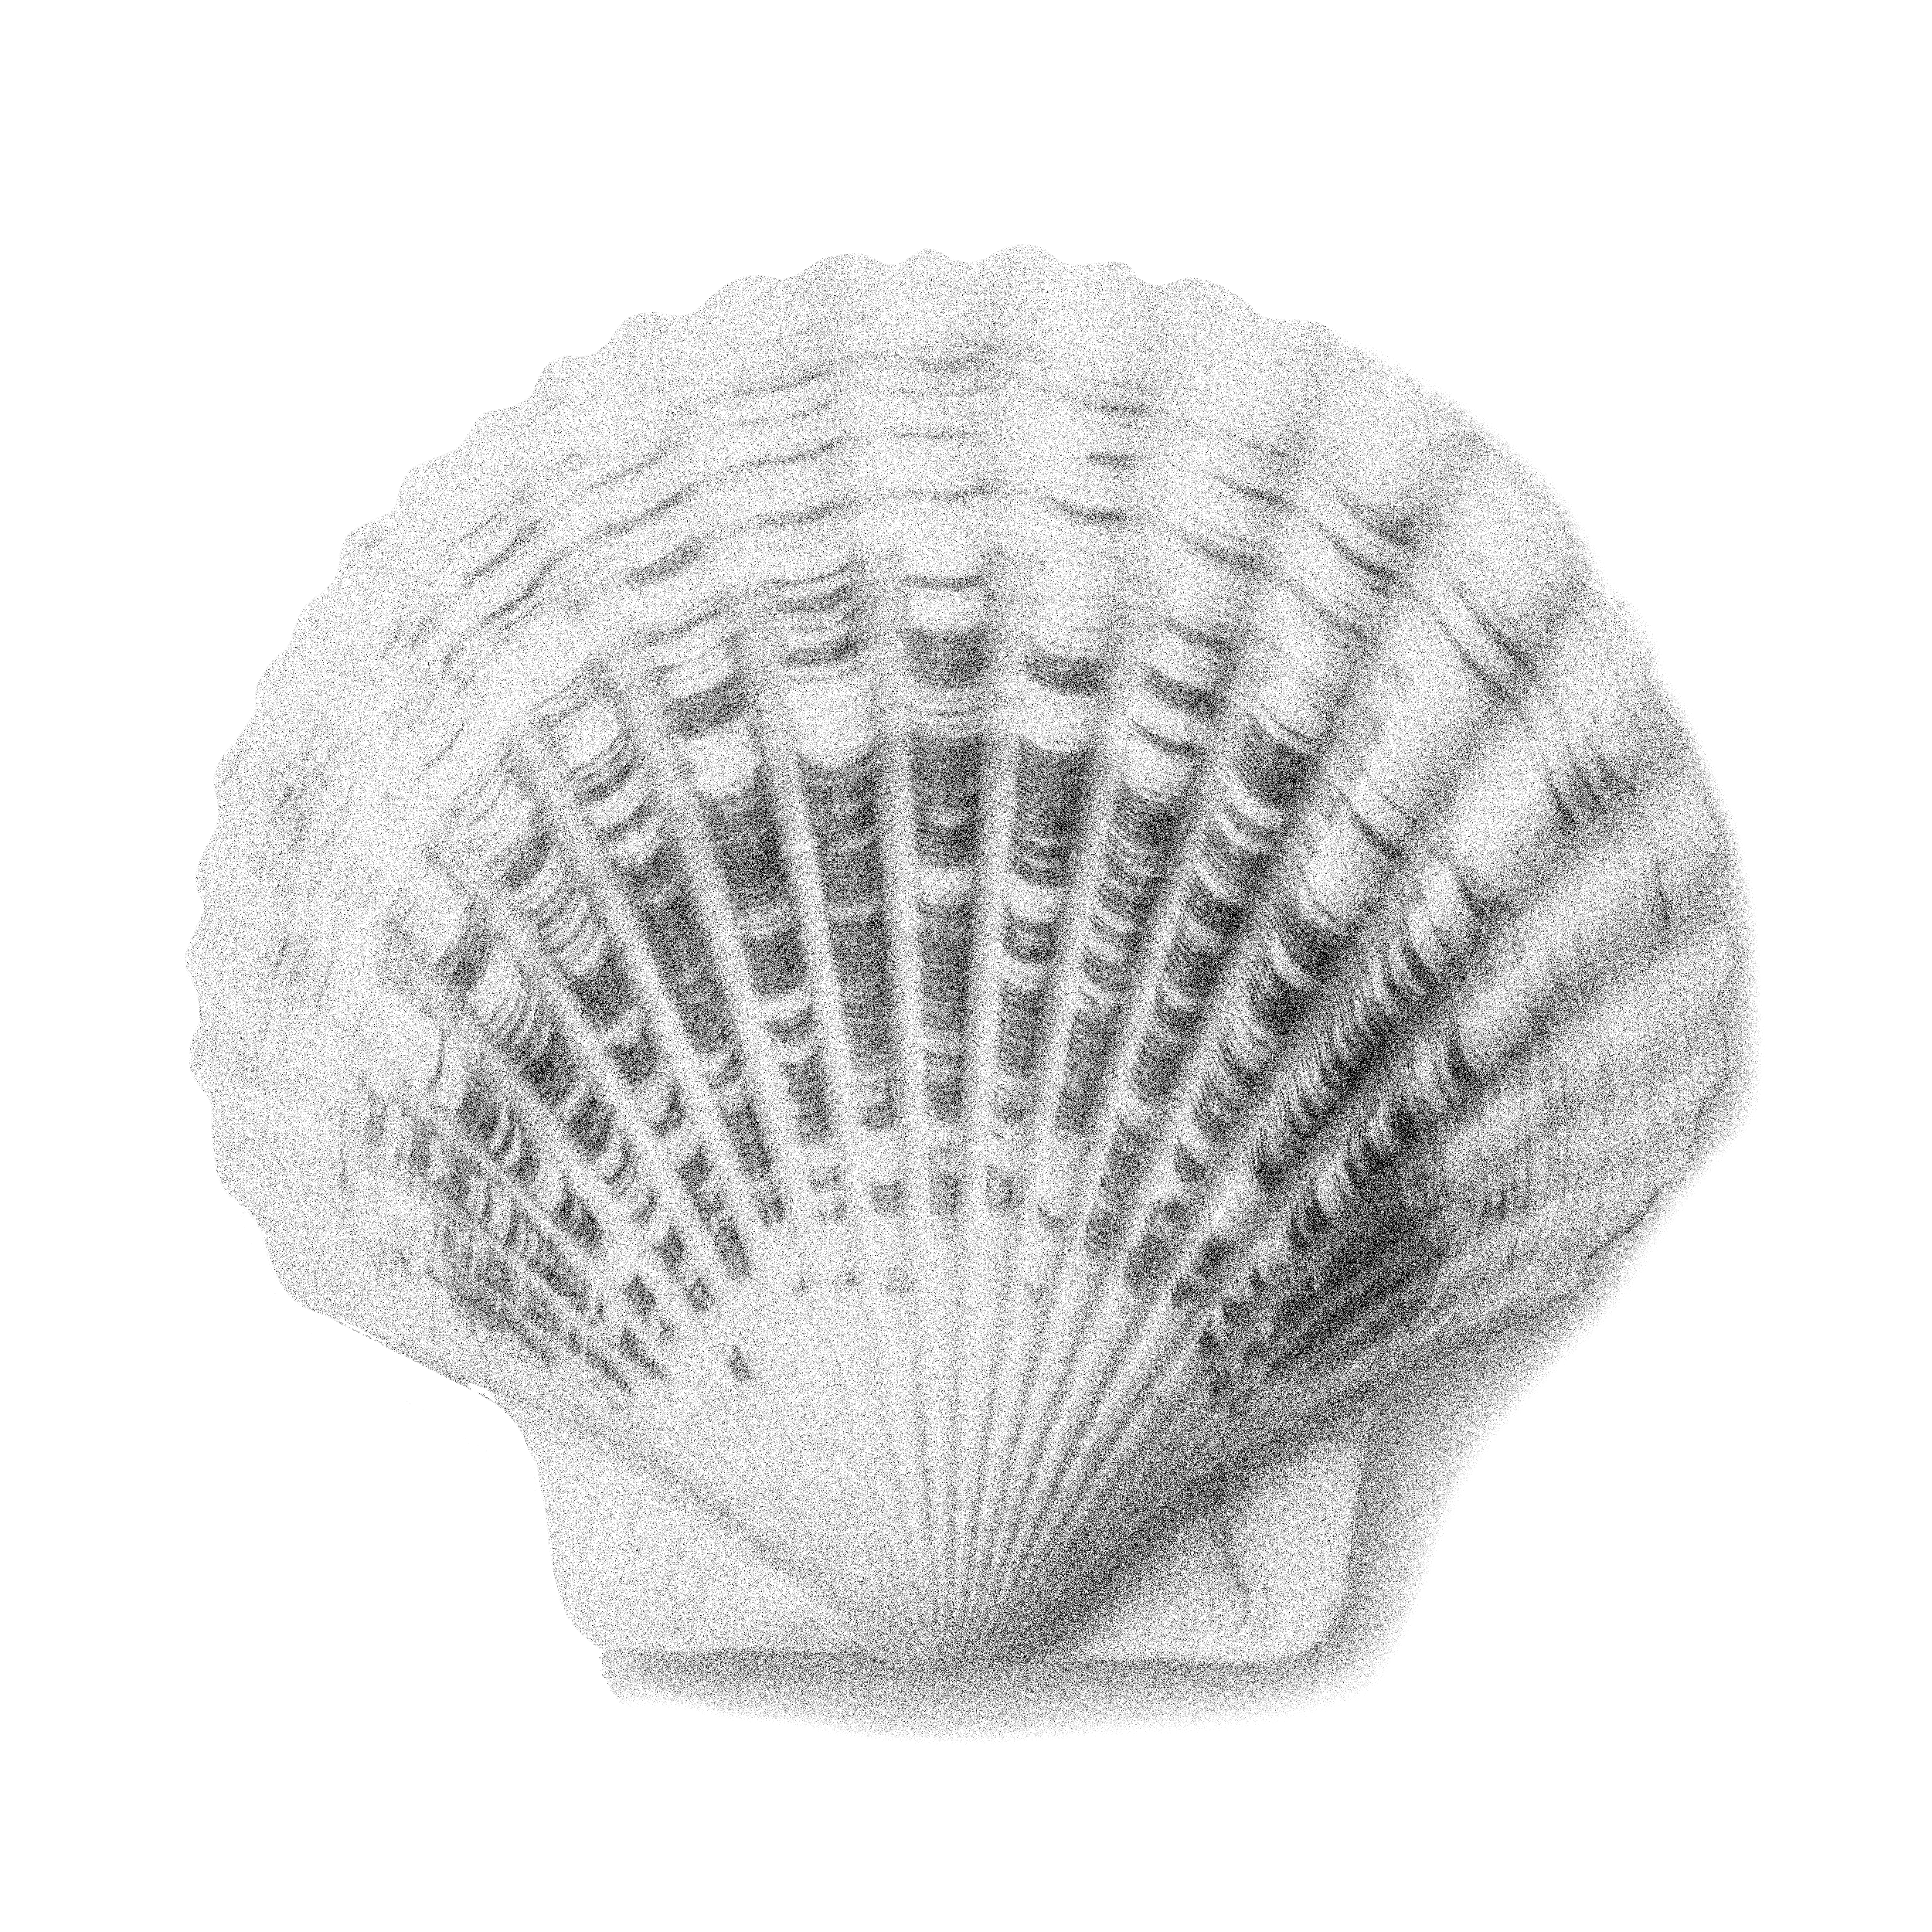 Illustration of a clamshell.